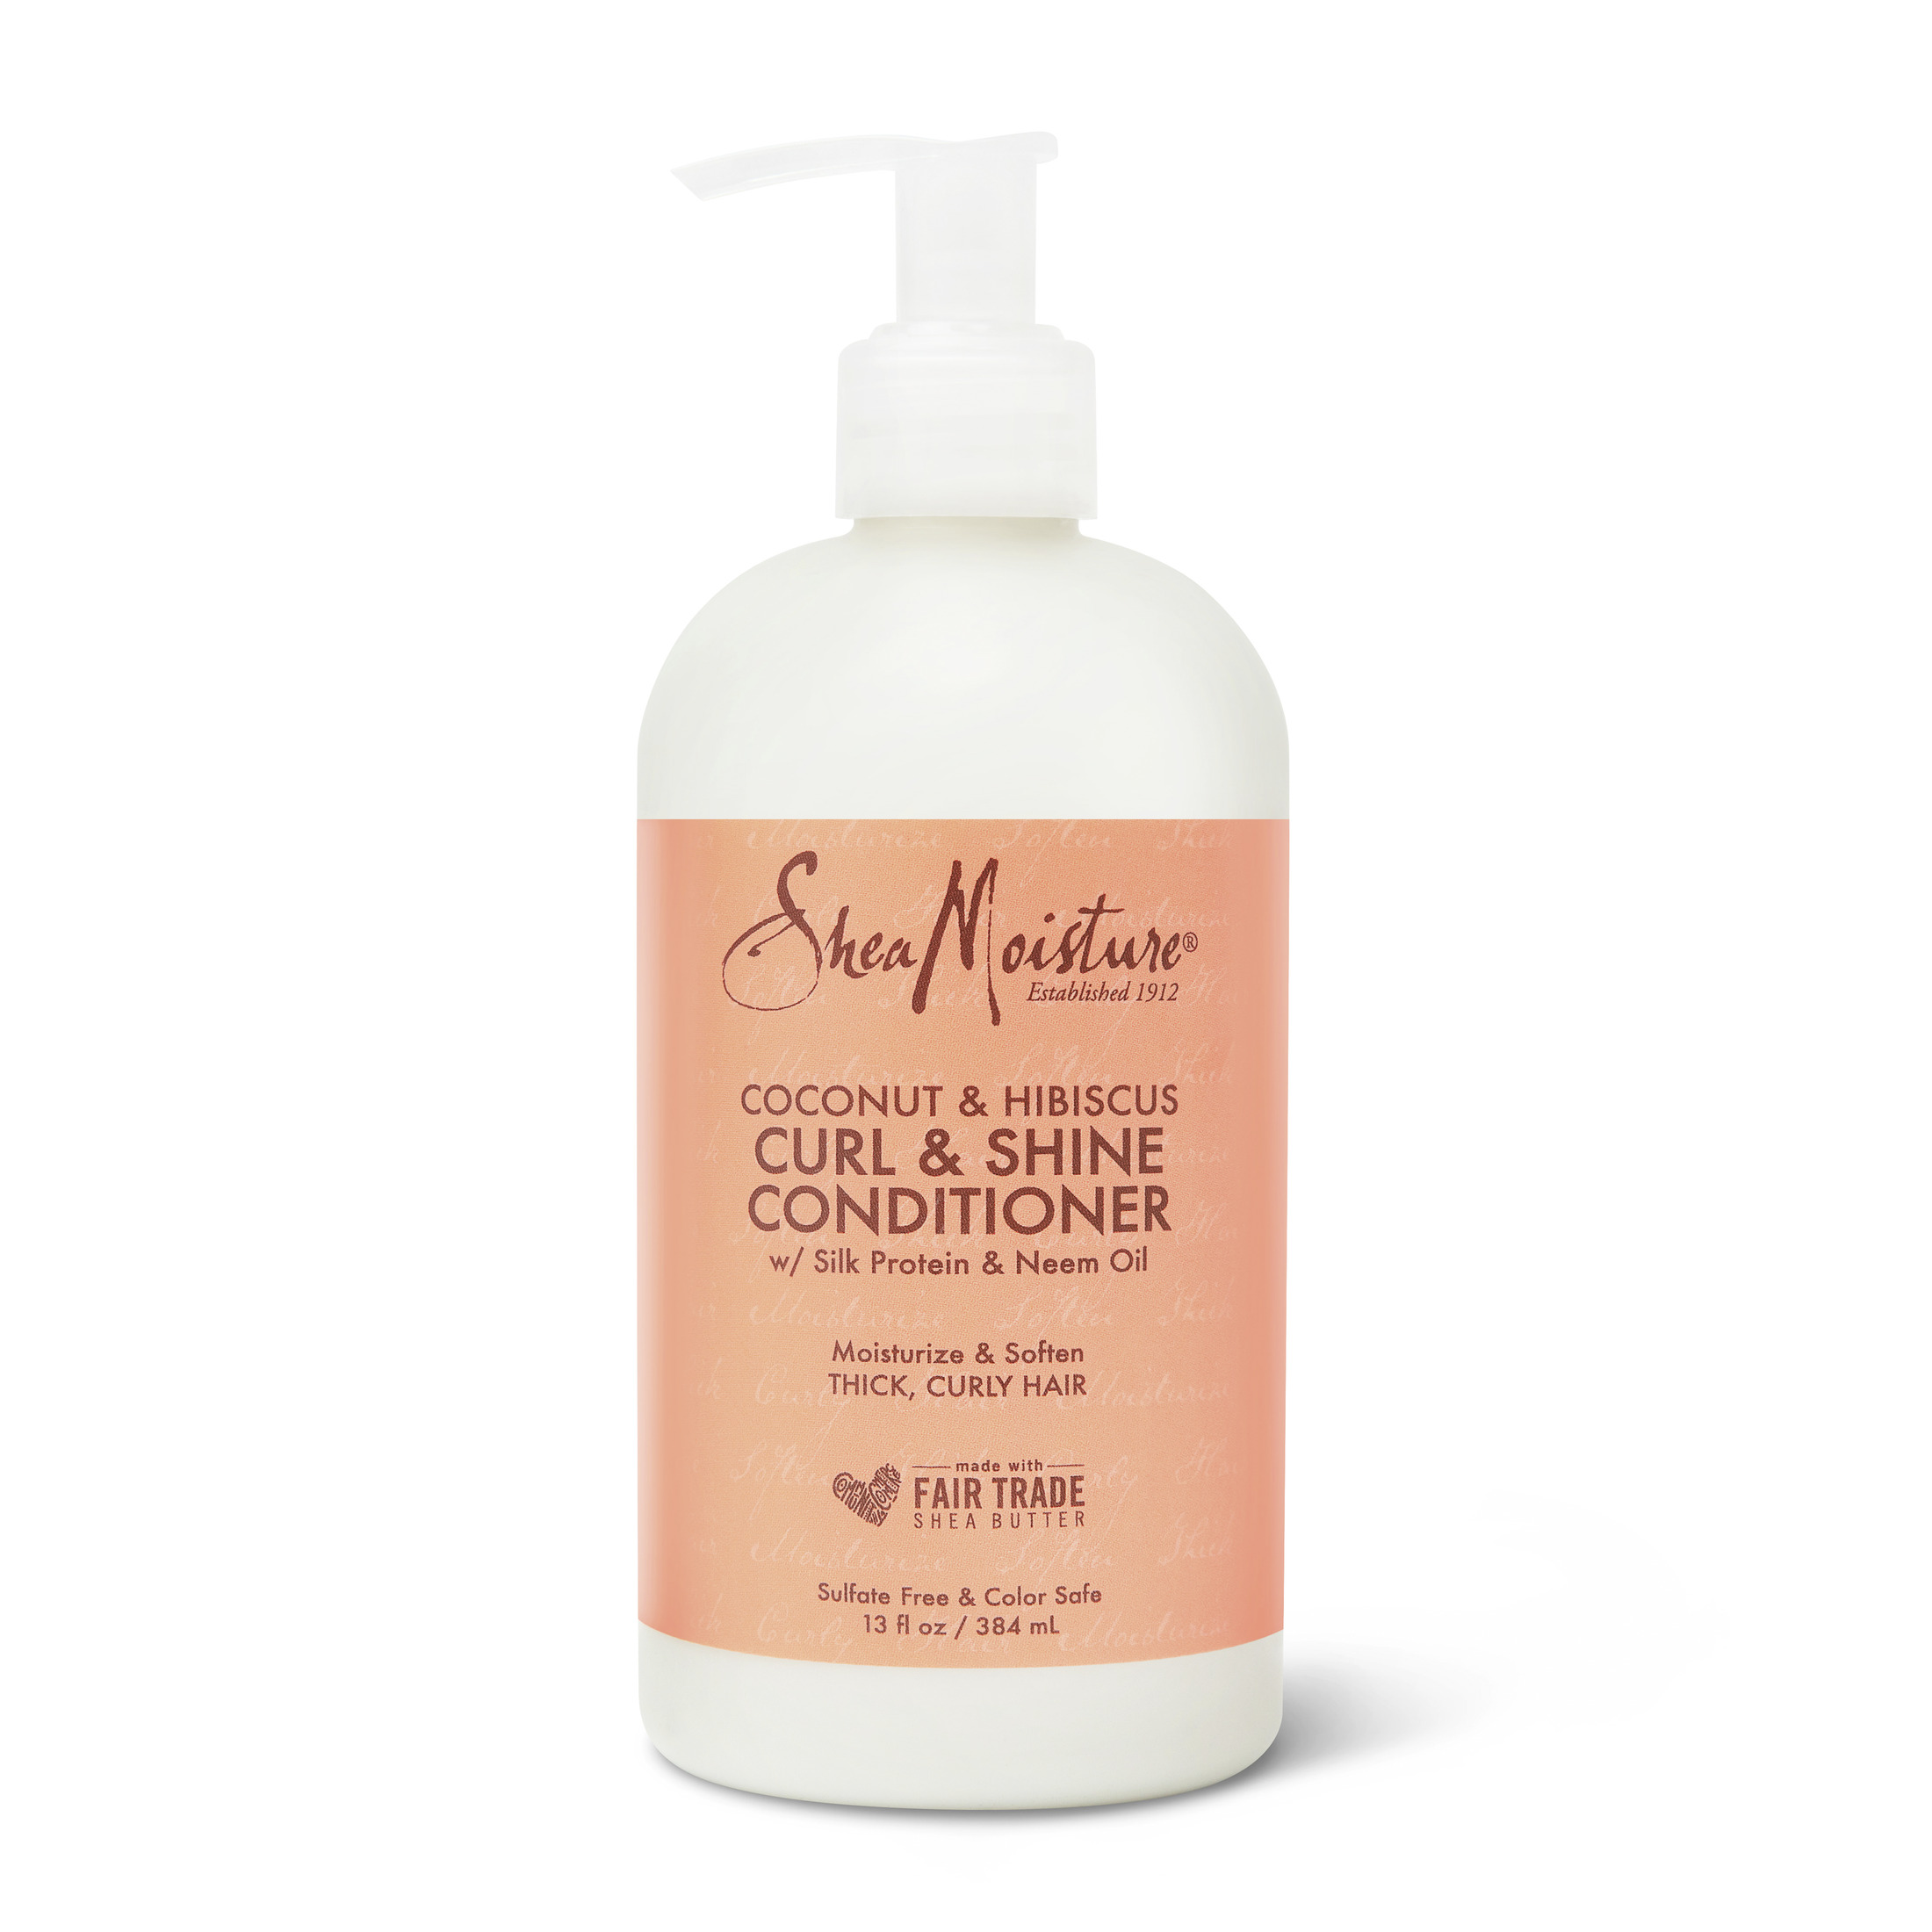 SheaMoisture Curl and Shine Moisturizing Curly Hair Conditioner, Coconut and Hibiscus, 13 fl oz - image 1 of 12